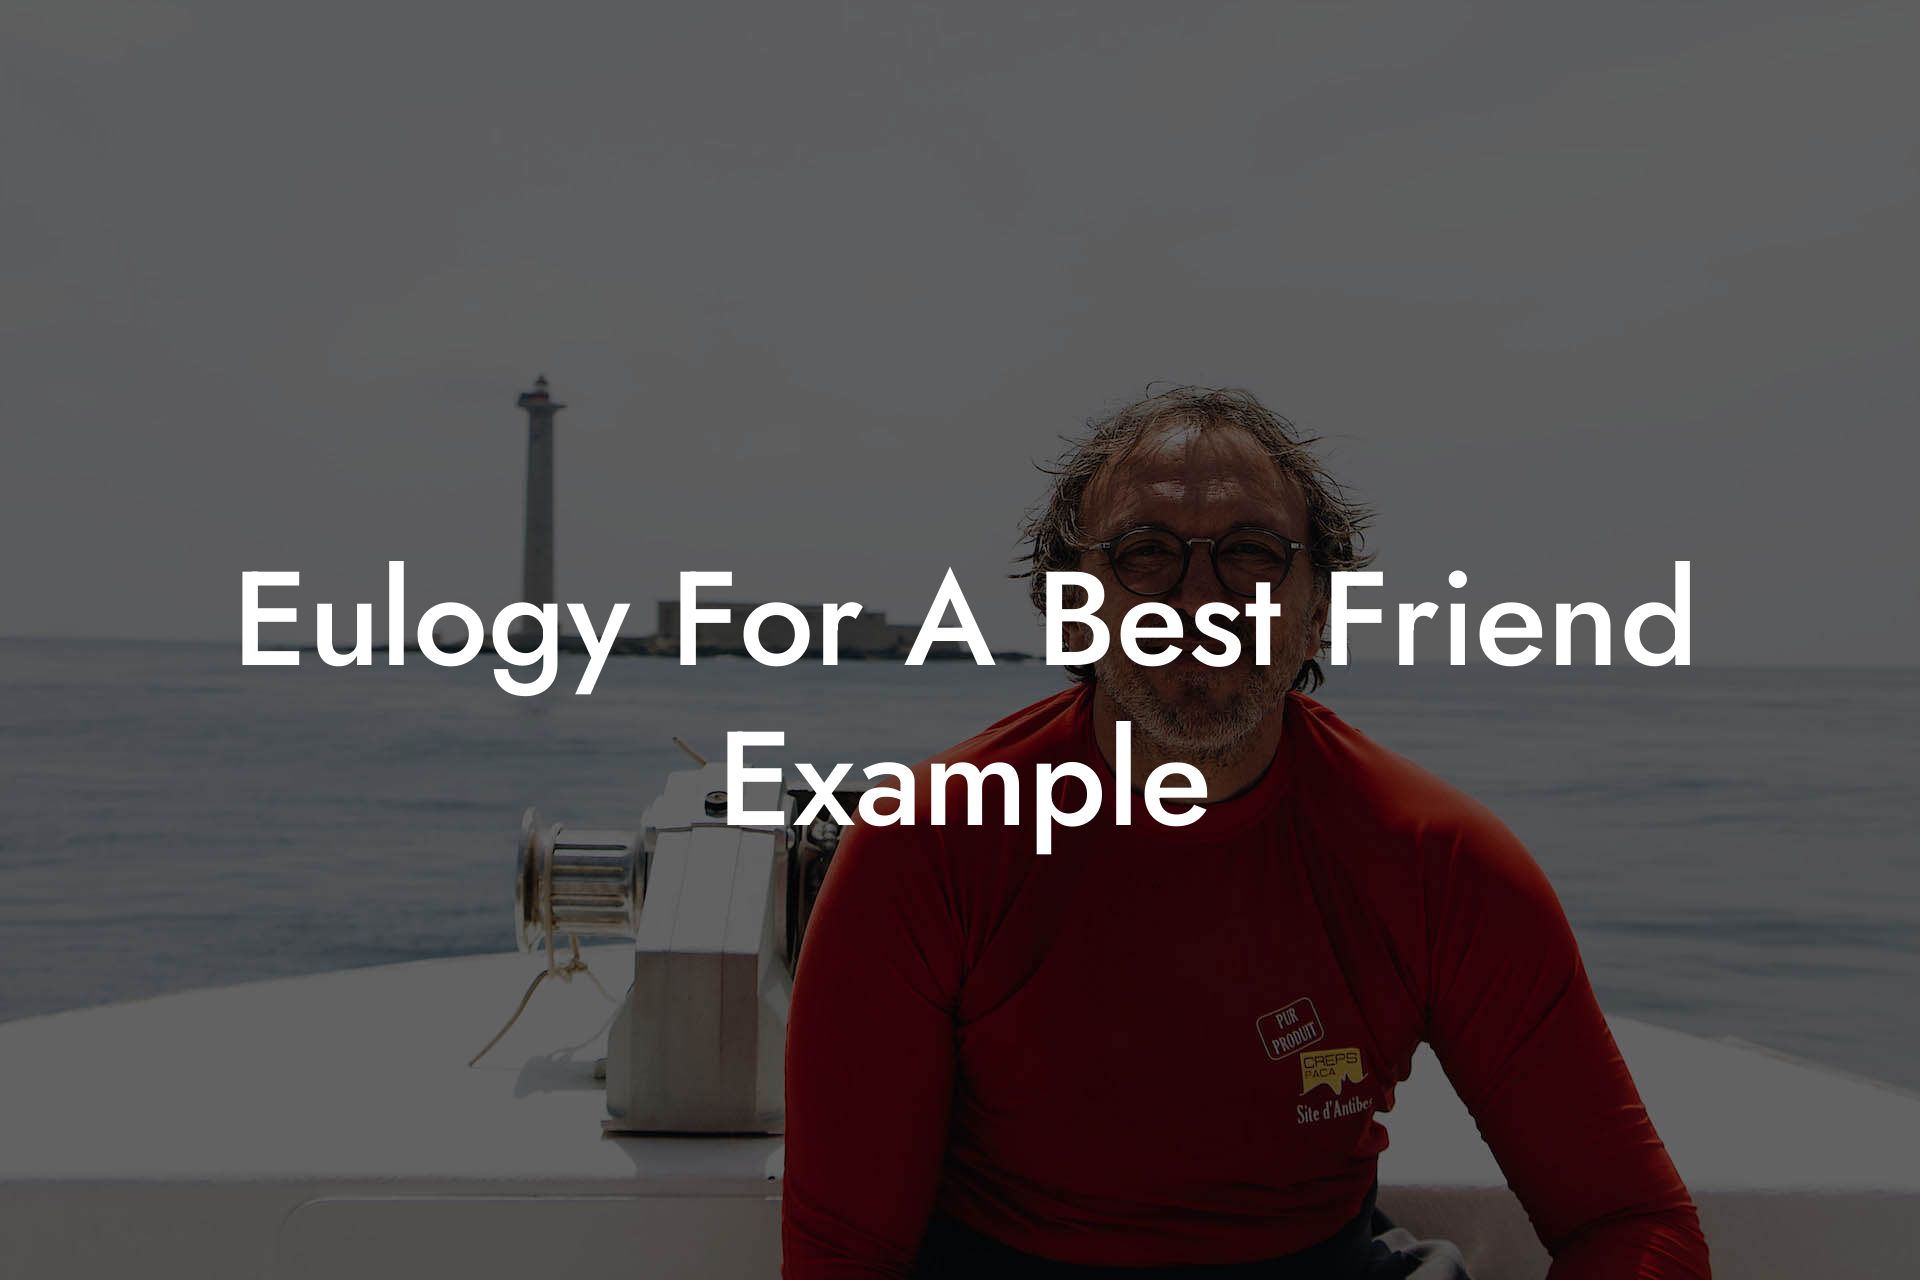 Eulogy For A Best Friend Example